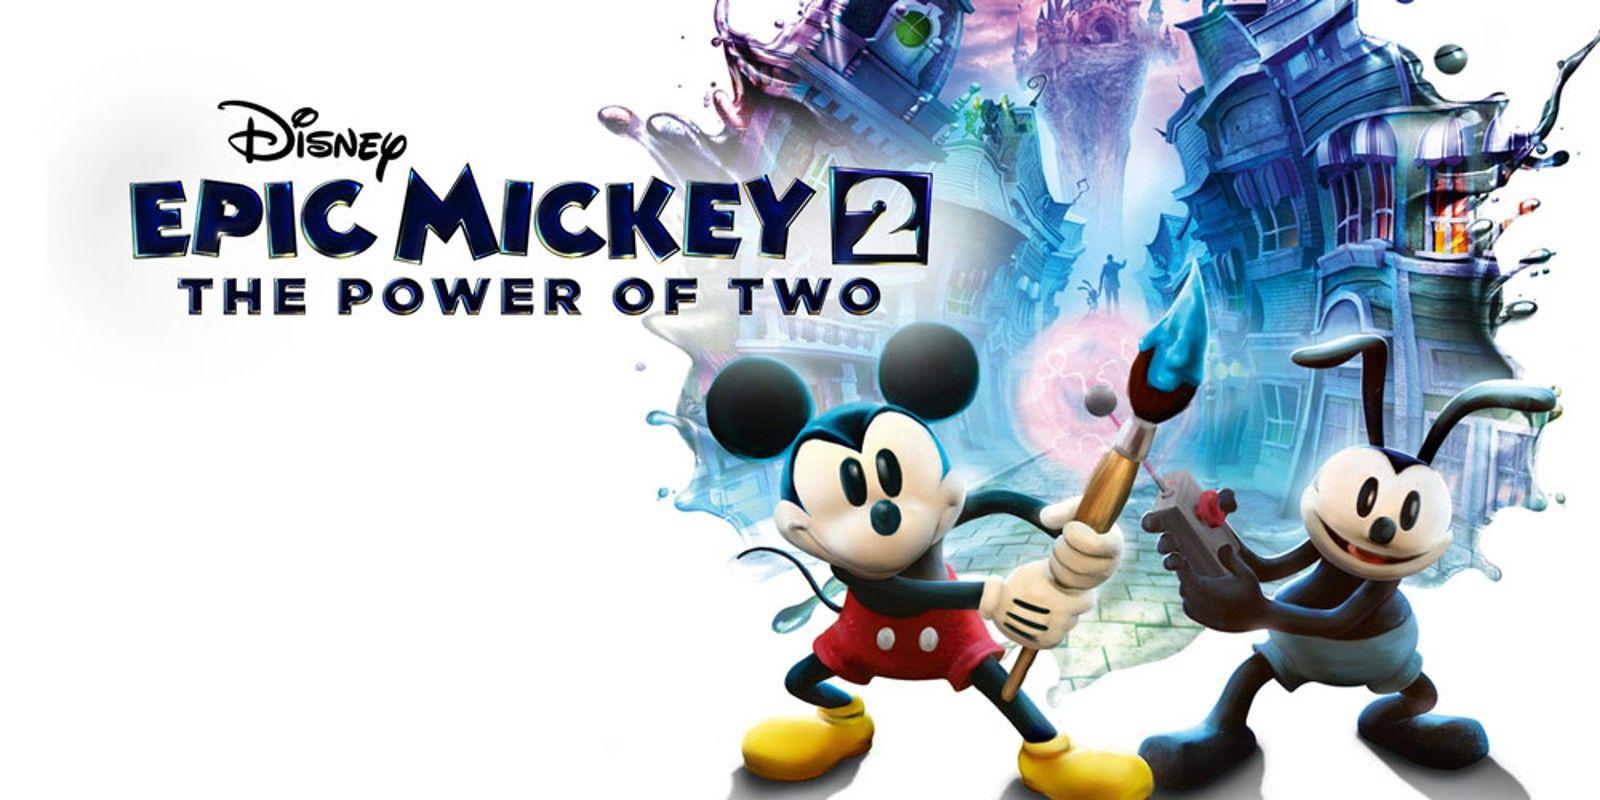 Epic Mickey 2 Logo - Disney Epic Mickey 2: The Power of Two